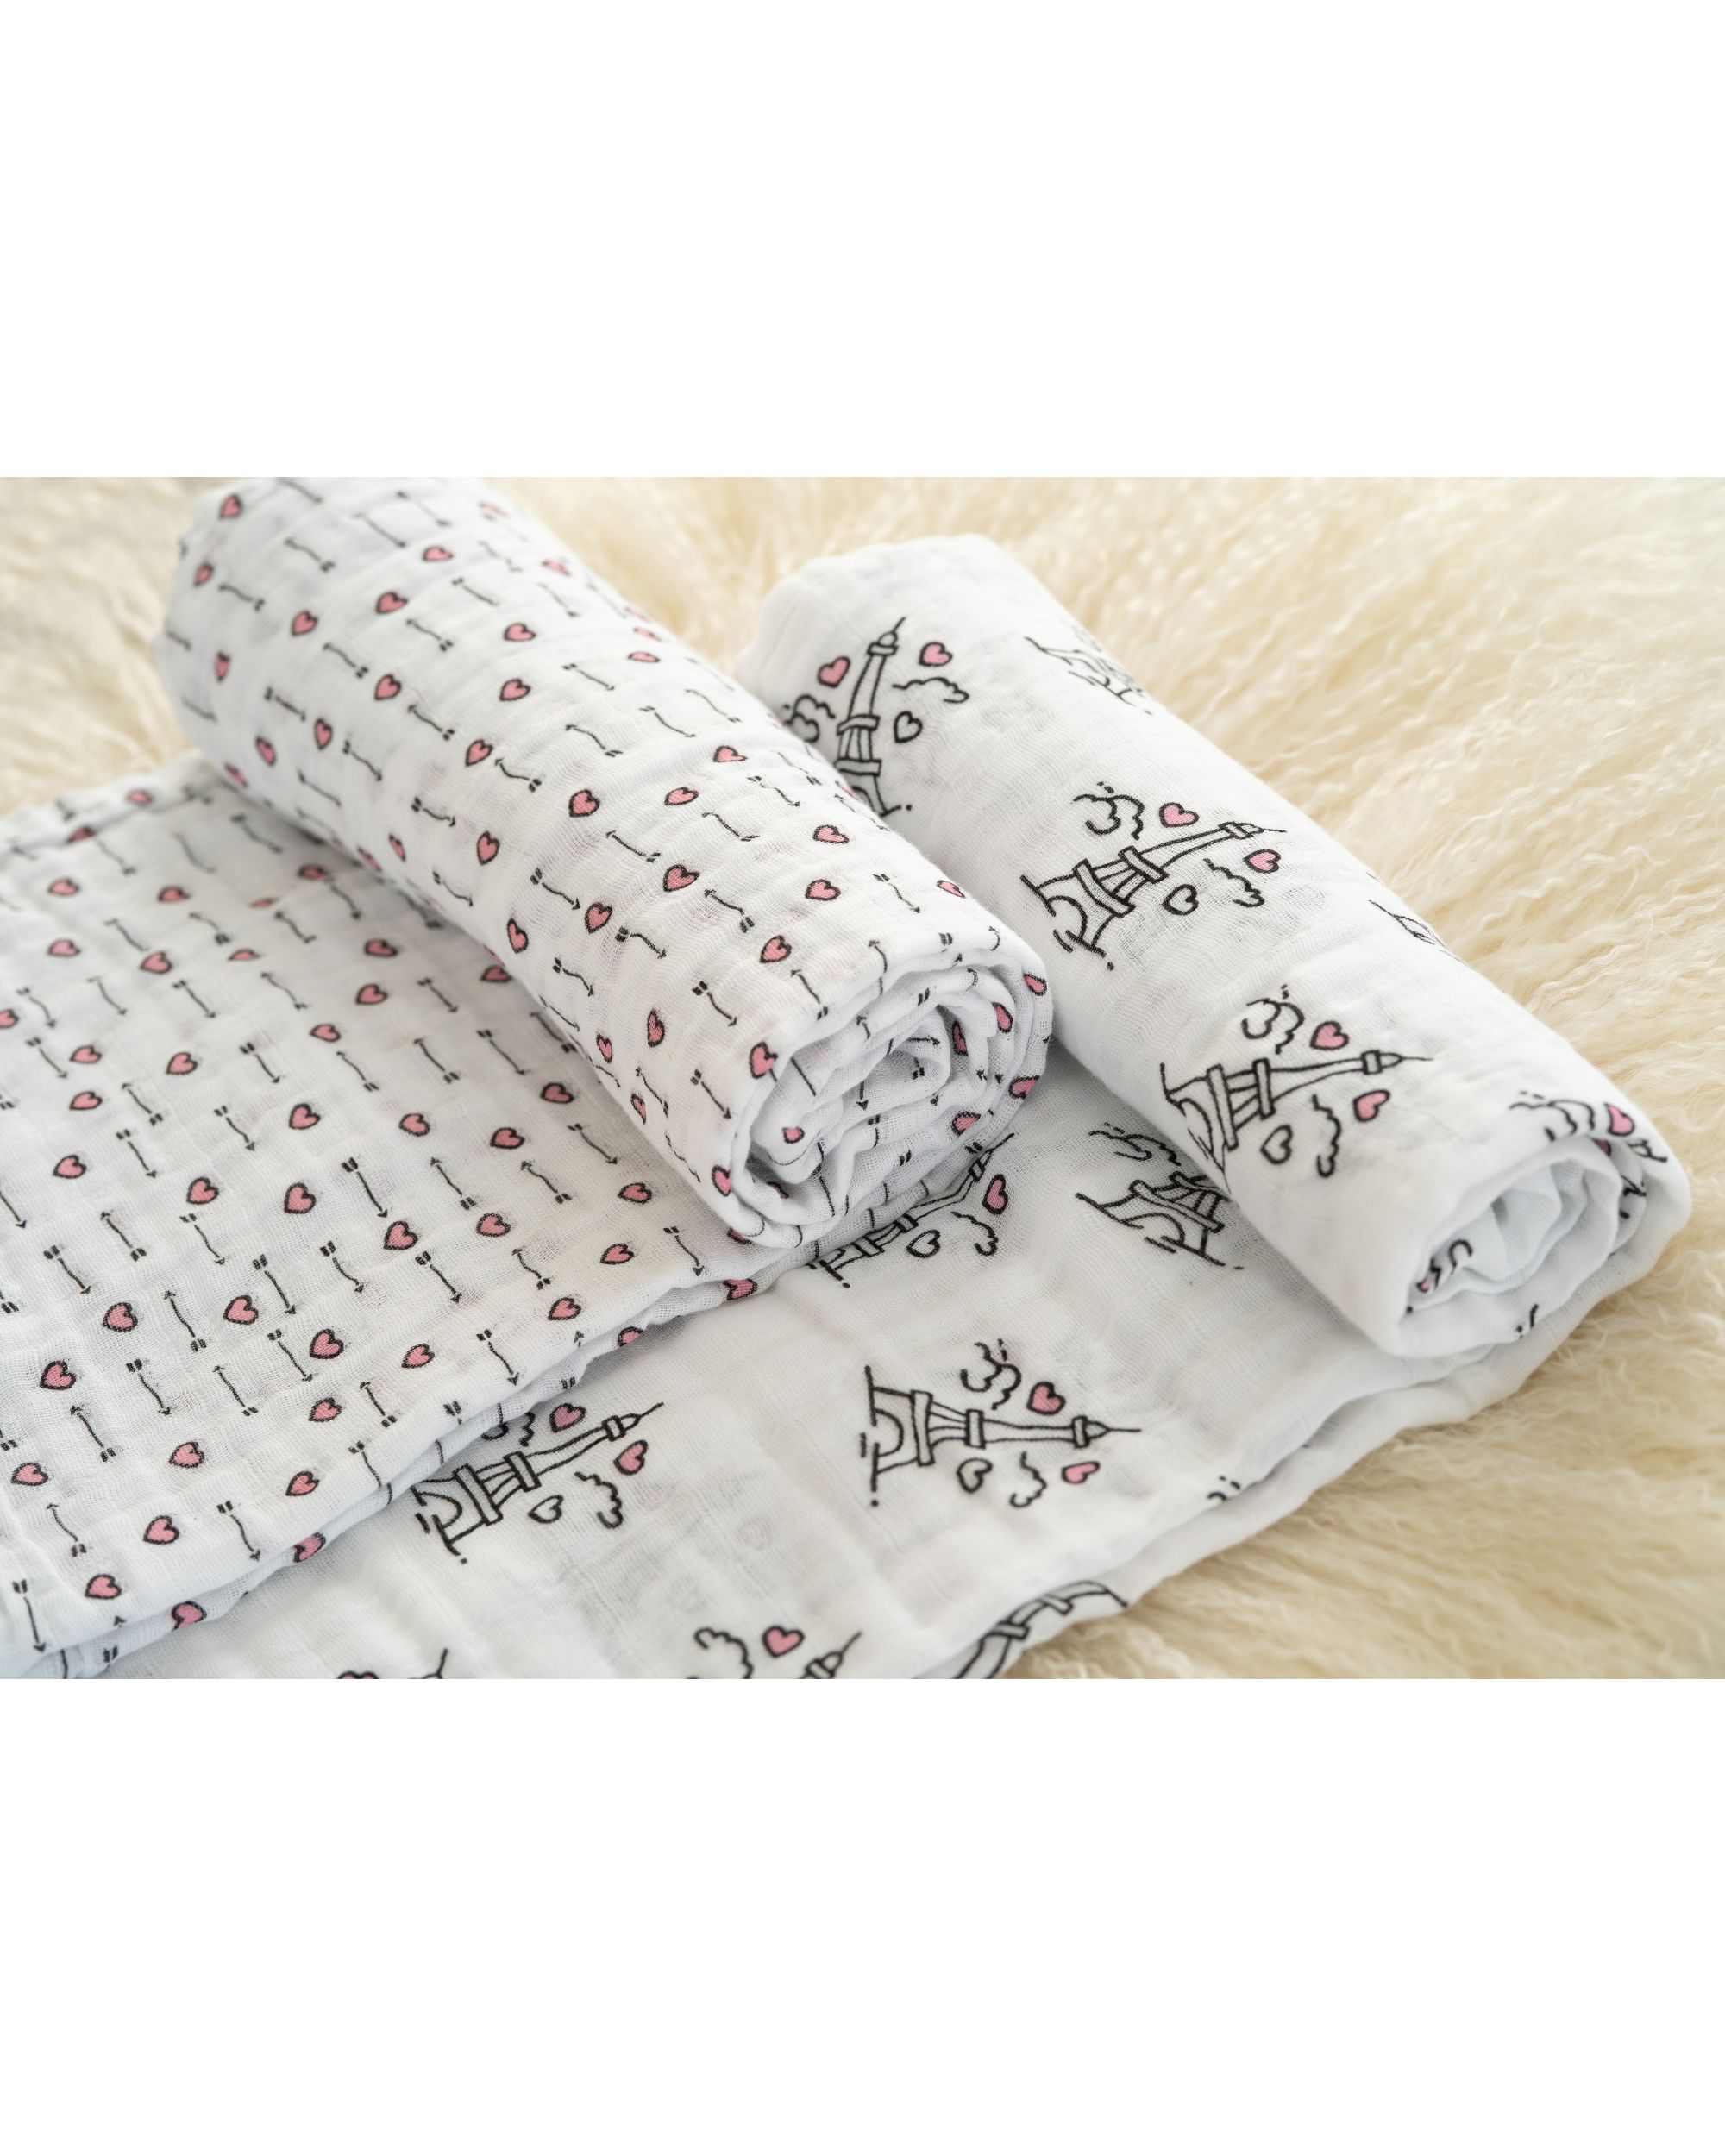 Black and White Printed muslin multipurpose baby swaddle - set of two